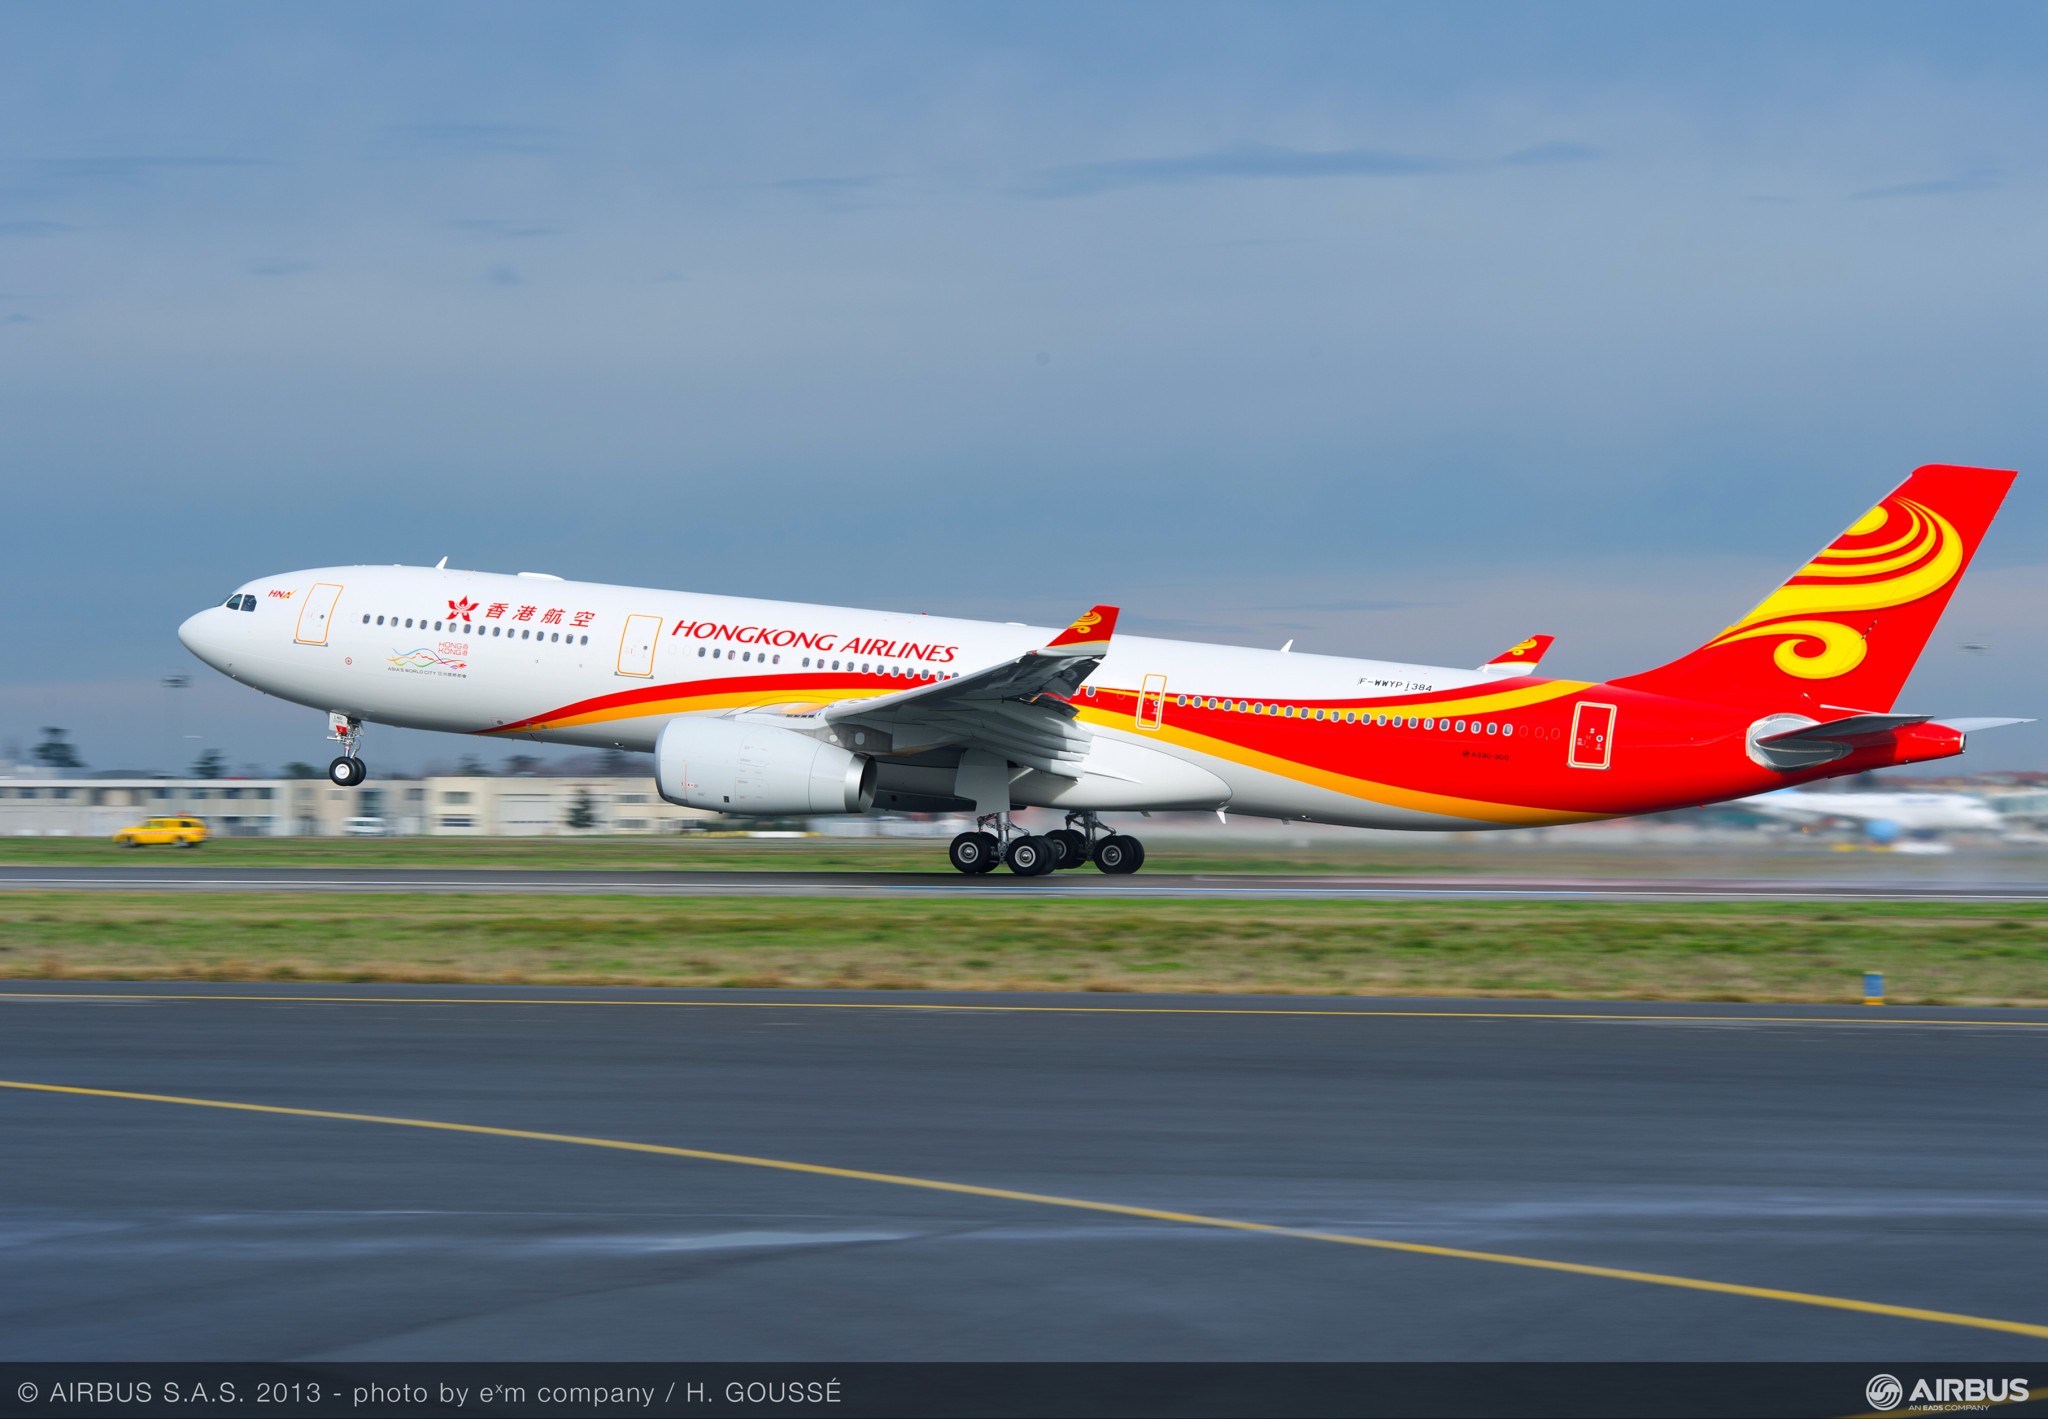 Hong Kong Airlines to add three A330-300s over peak summer season